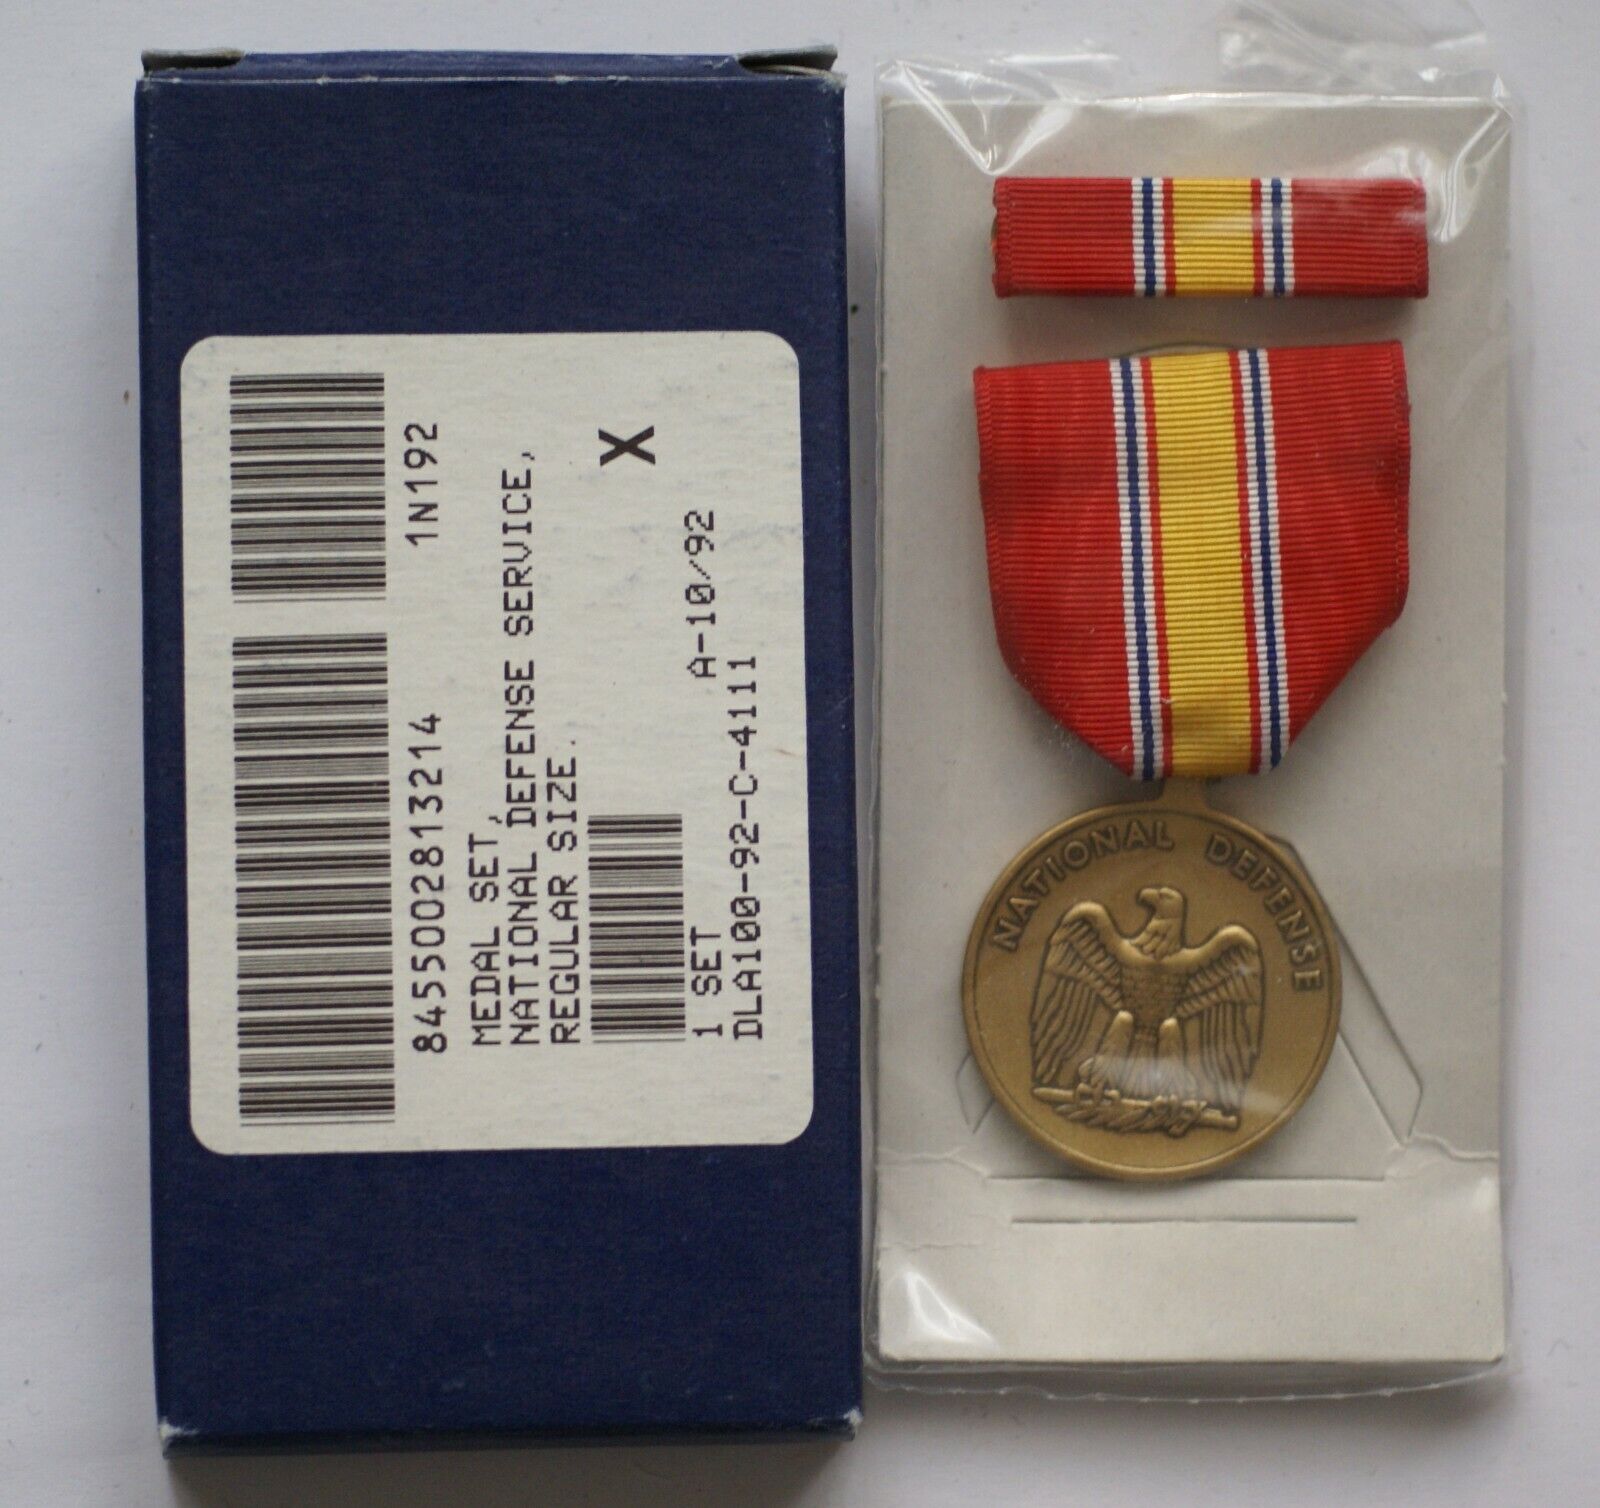 US National Defense Medal from a 1992 contract for First Gulf War era service 